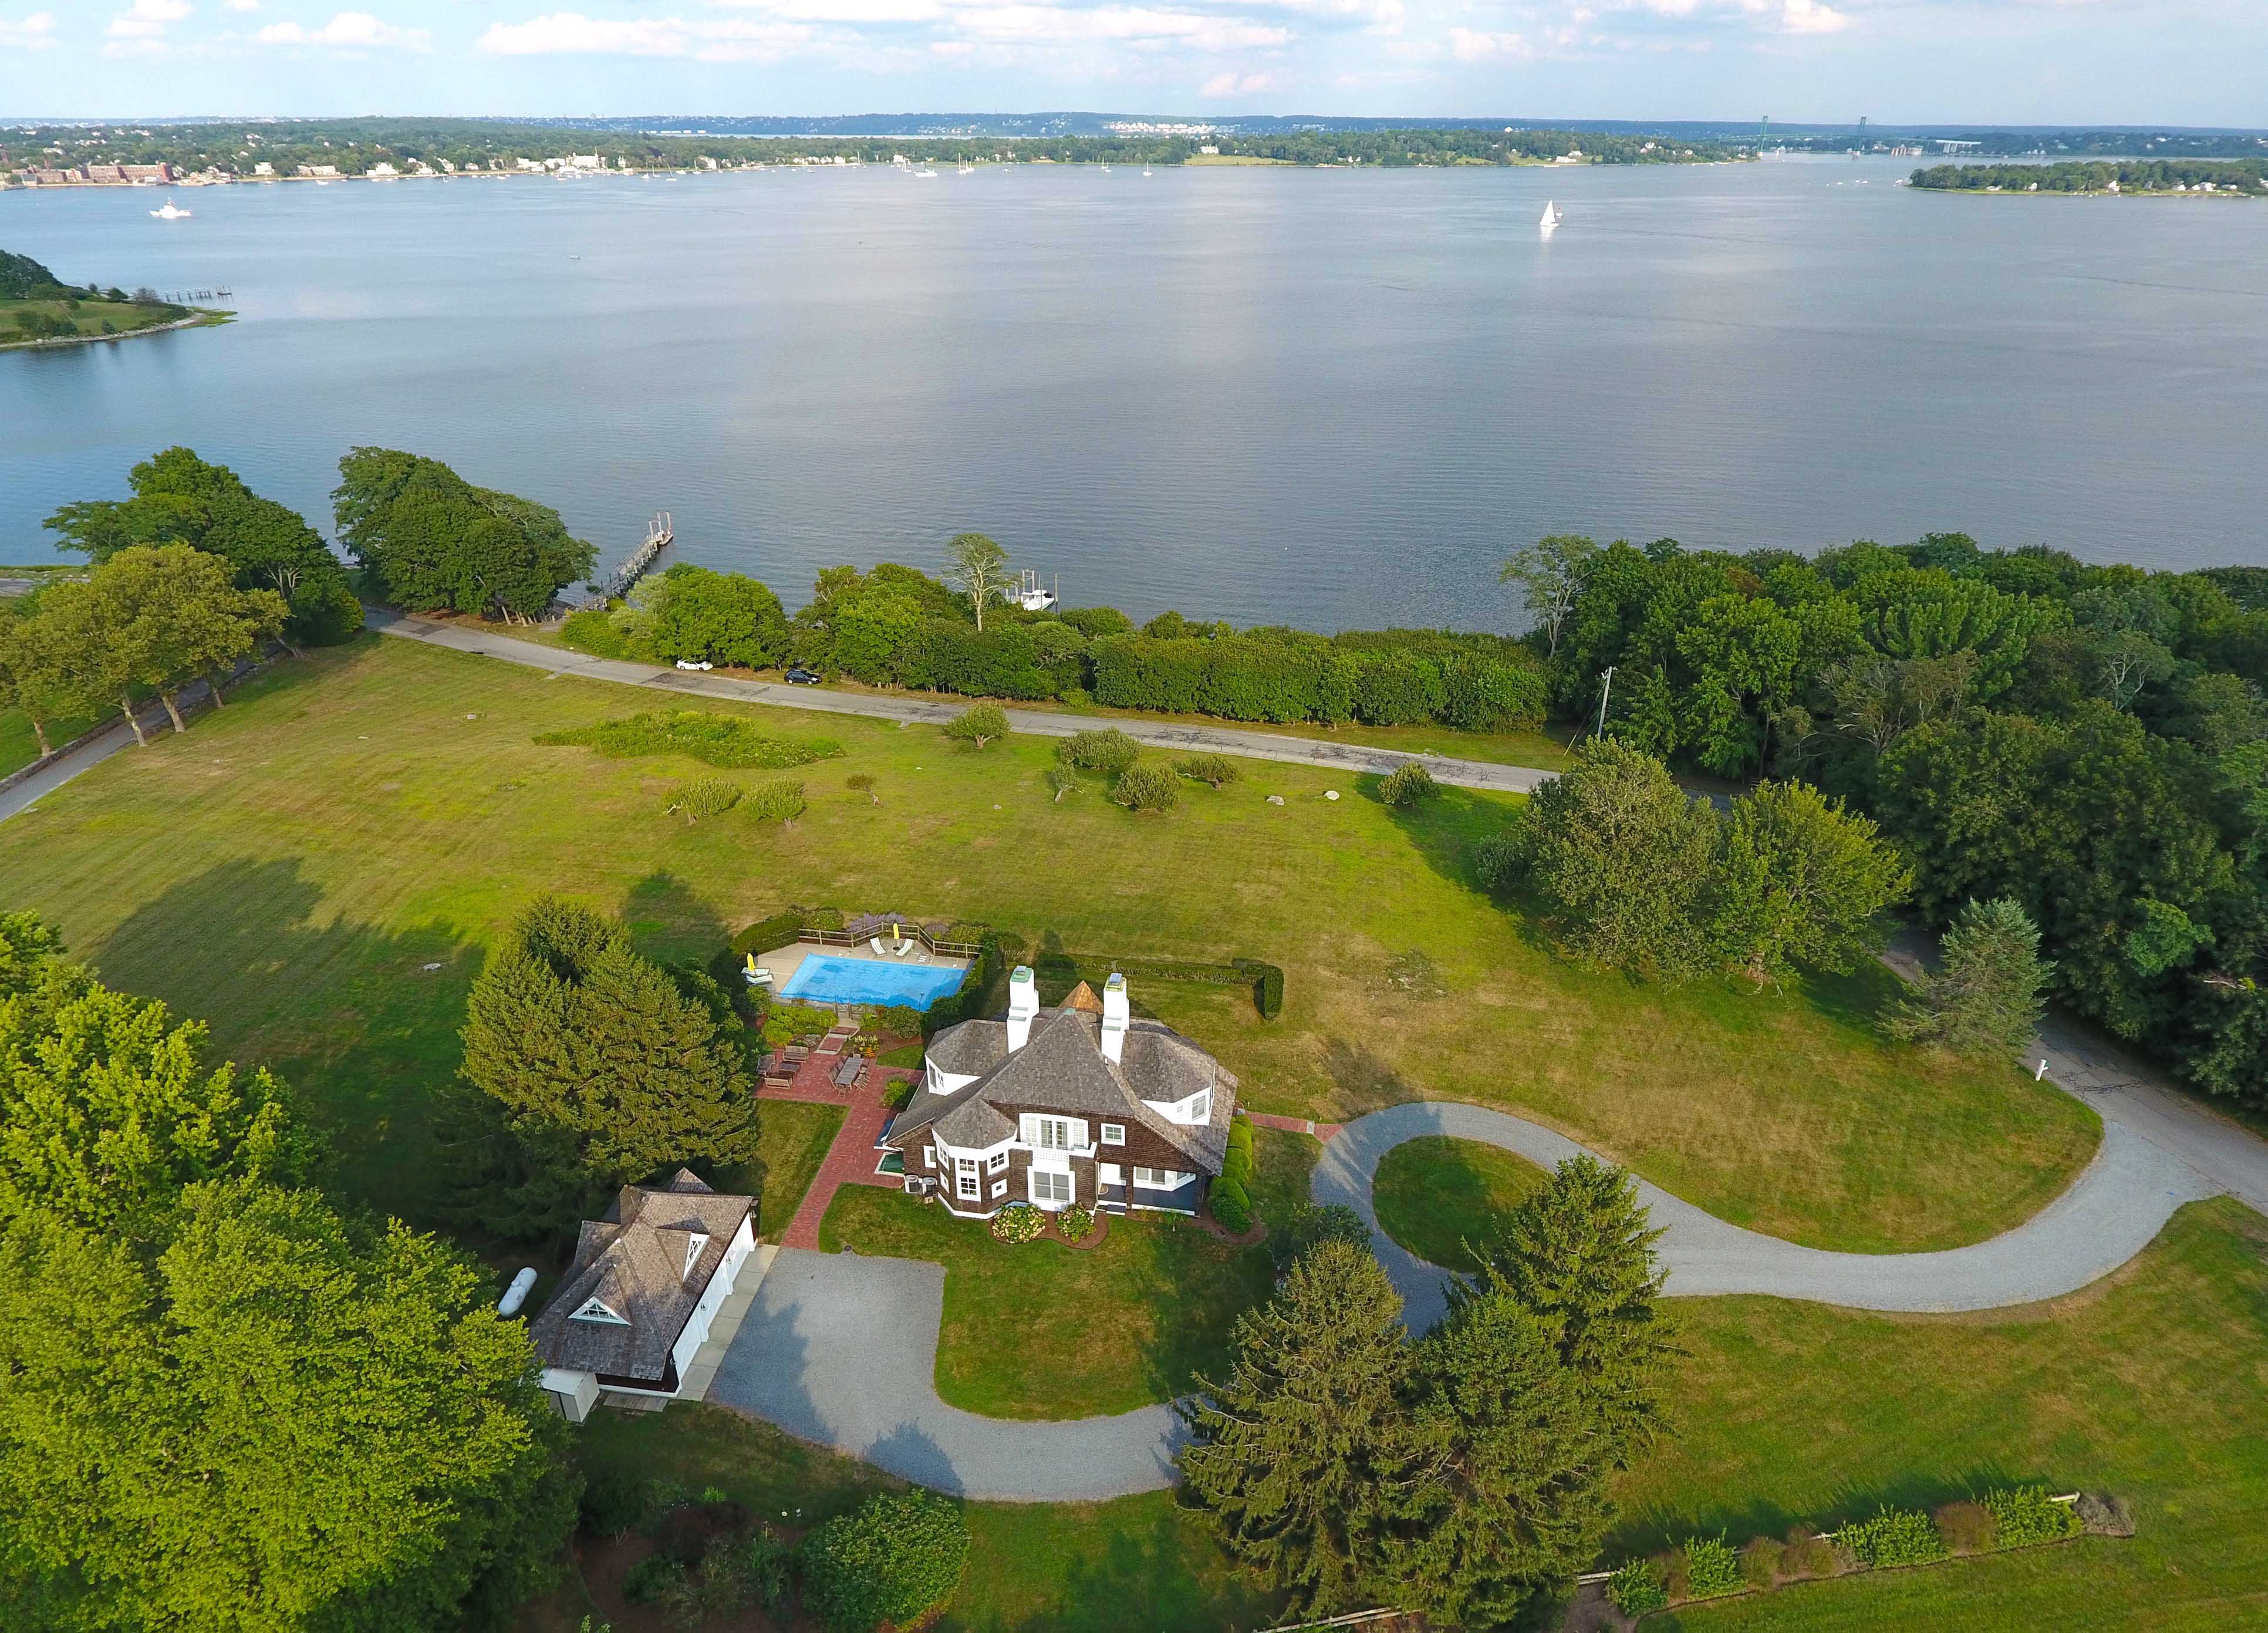 Waterfront Cottage in Bristol sells for $1.6 million, highest sale in Bristol year-to-date